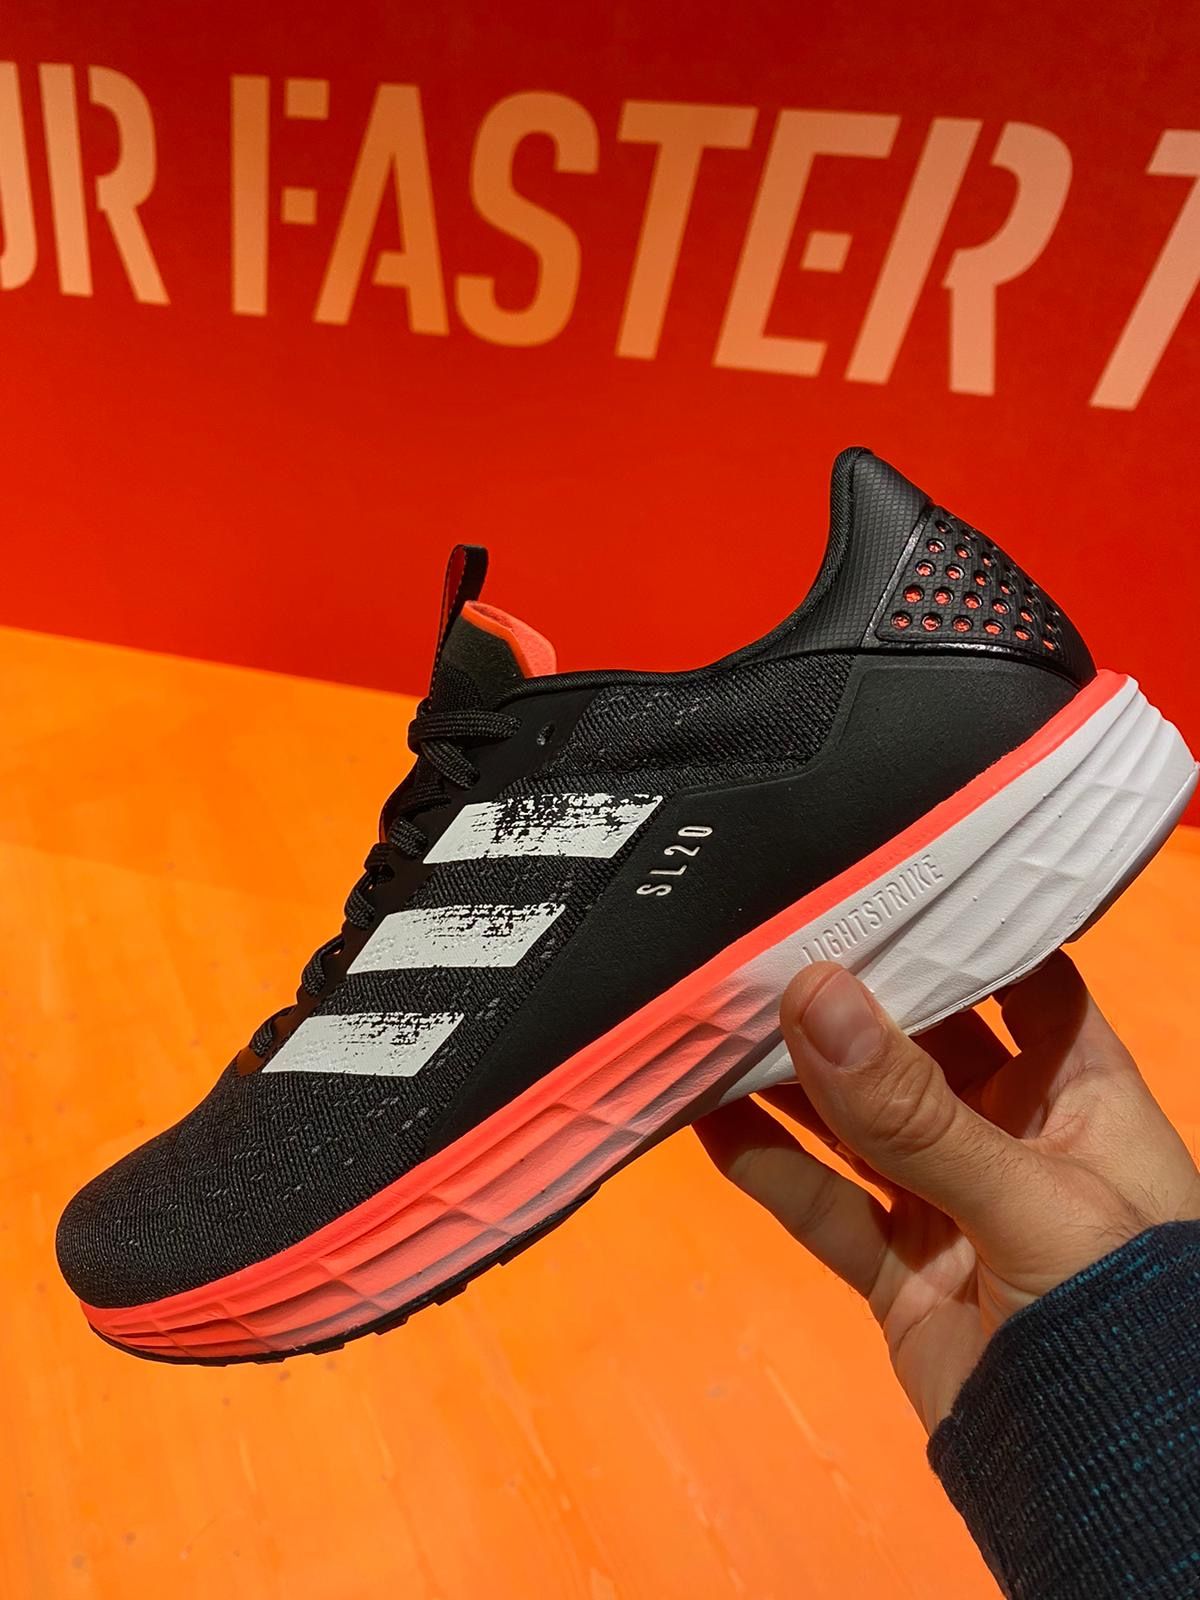 adidas release the SL20, a new running designed to go fast